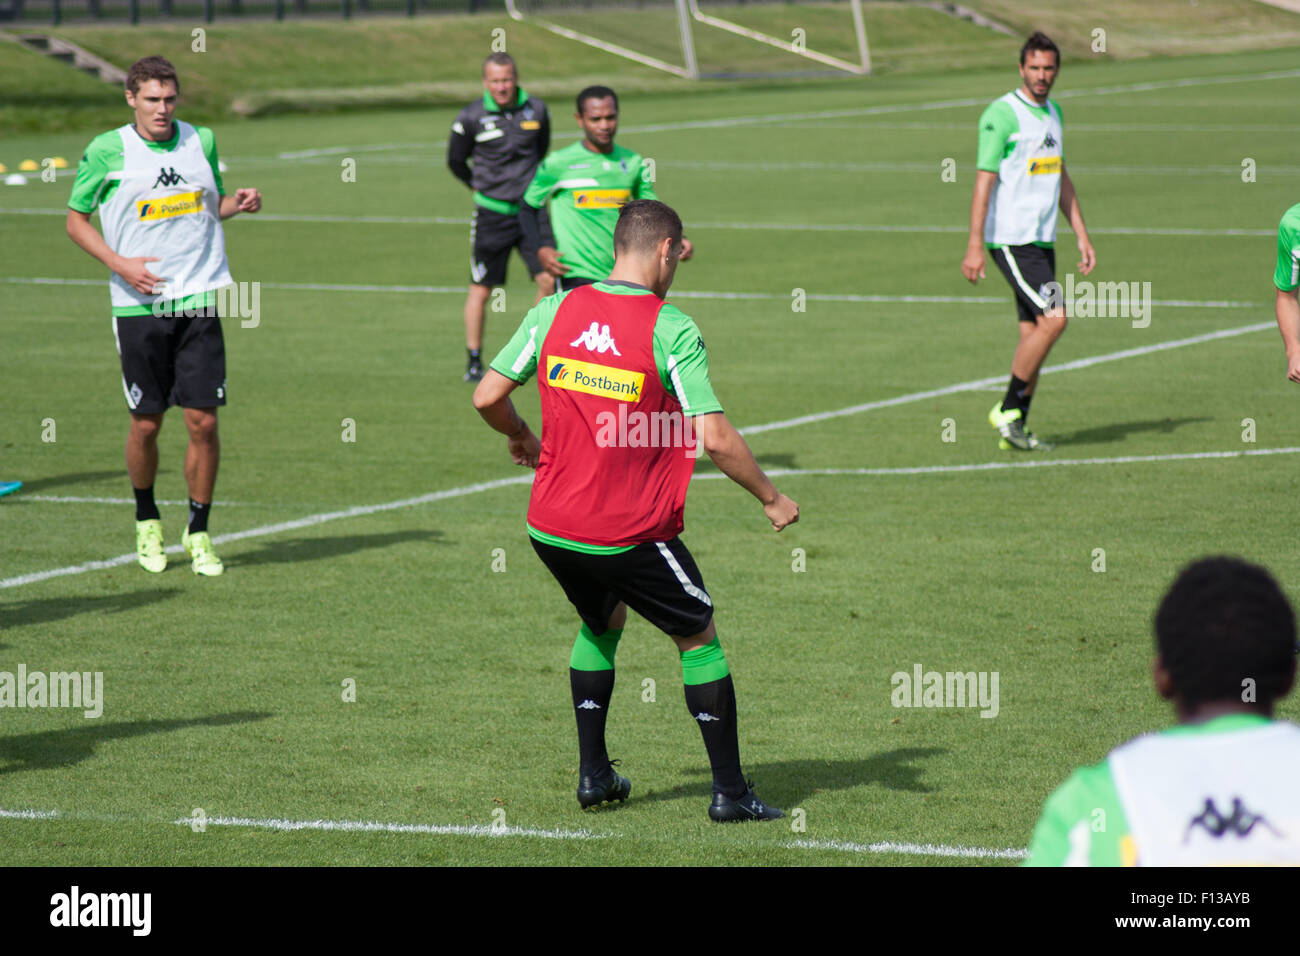 Mönchengladbach, Germany. 26th August, 2015. Professional football players during training session of german football club VFL Borussia Mönchengladbach. Credit:  Daniel Kaesler/Alamy Live News Stock Photo